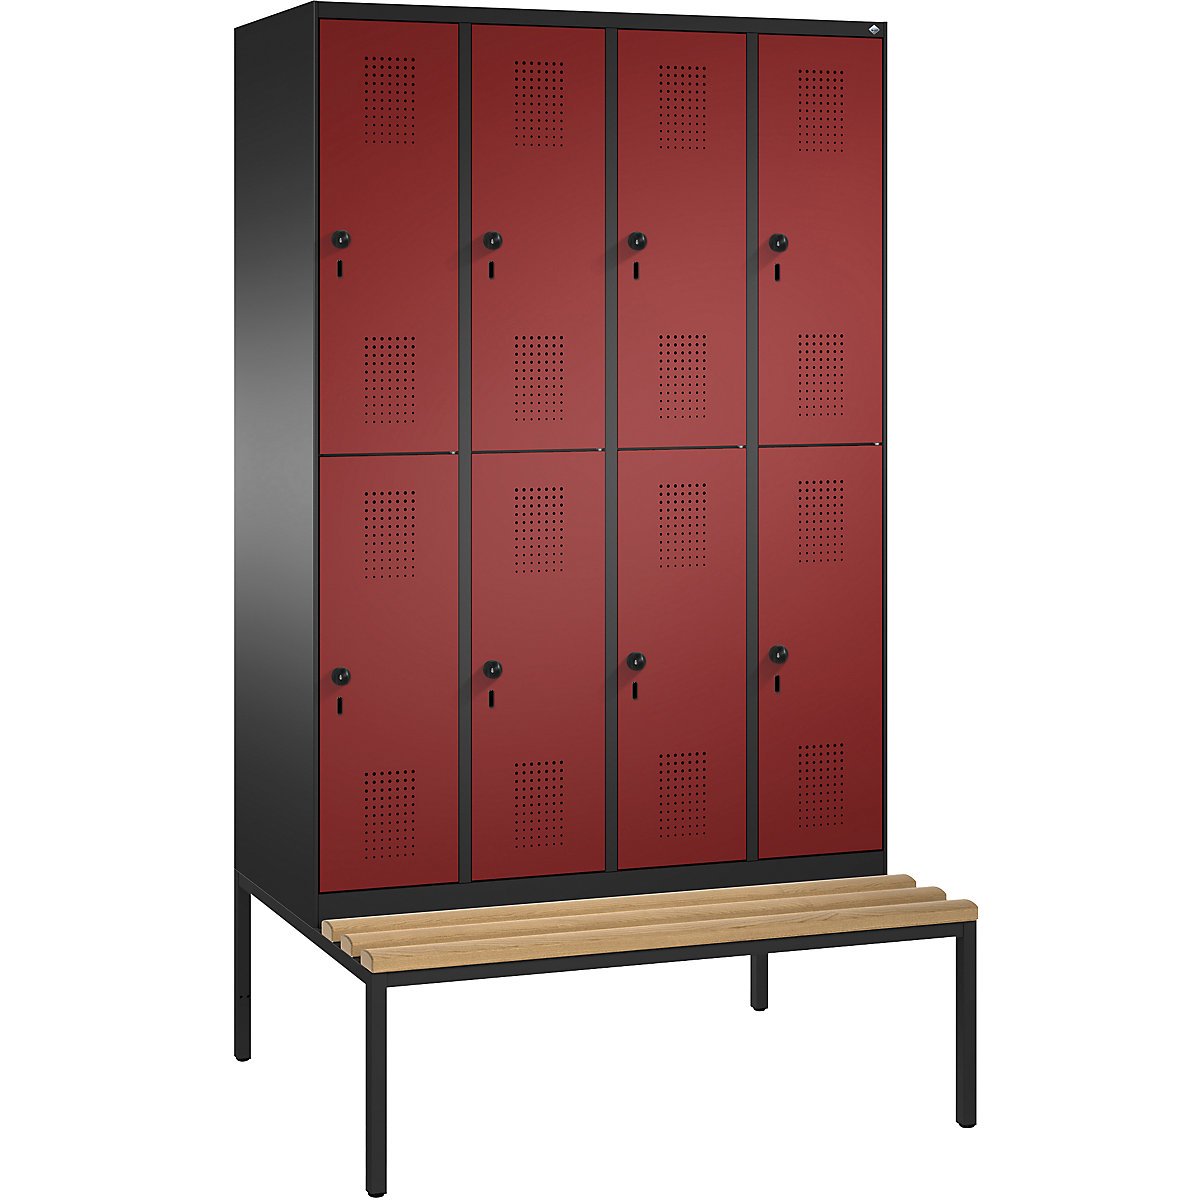 EVOLO cloakroom locker, double tier, with bench – C+P, 4 compartments, 2 shelf compartments each, compartment width 300 mm, black grey / ruby red-11